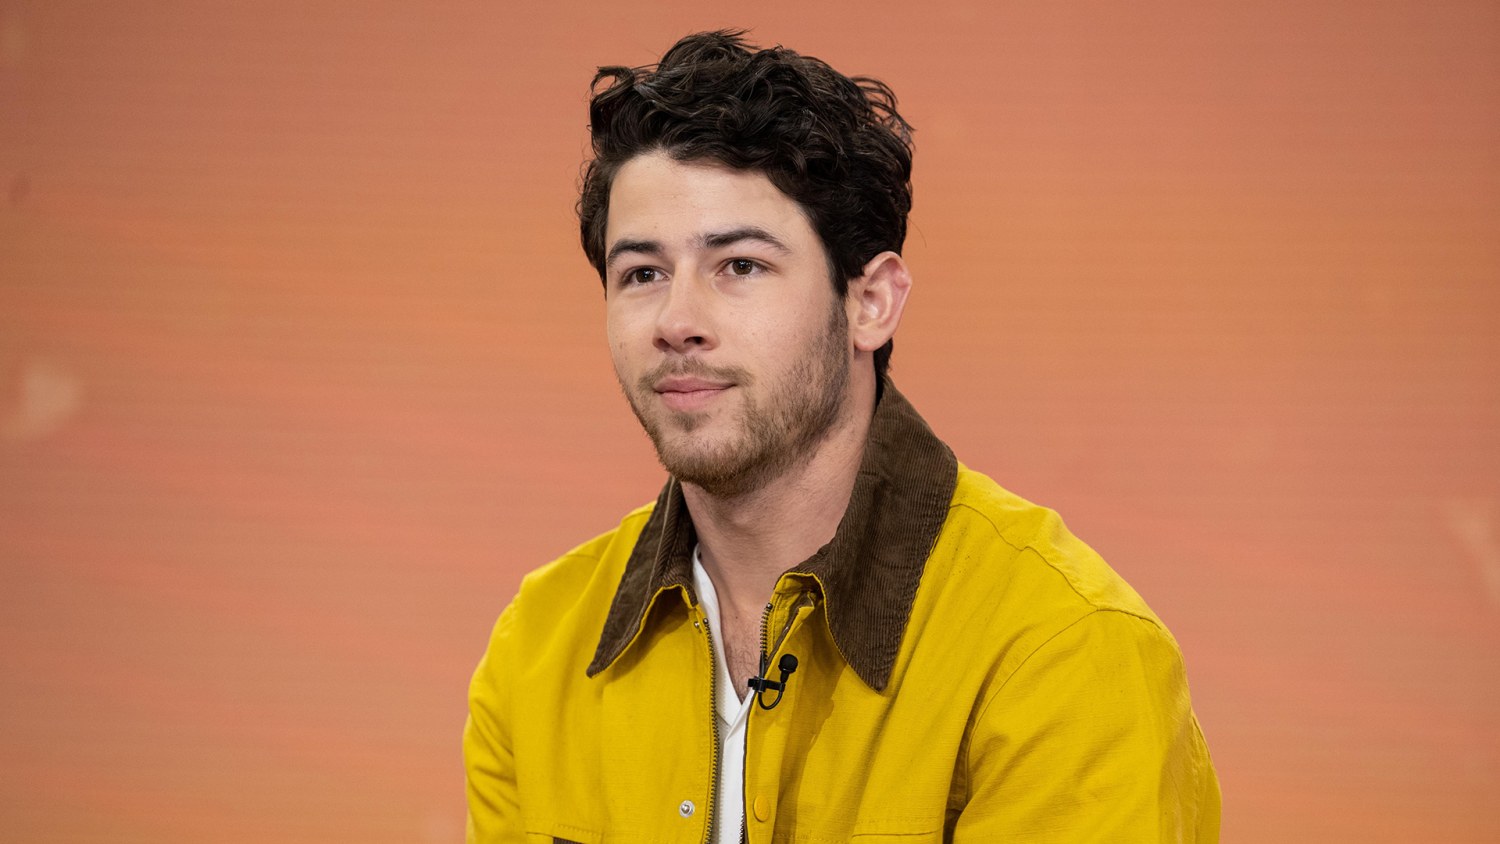 Jonas Brothers Coming To Broadway For Five-Show Stand – Deadline